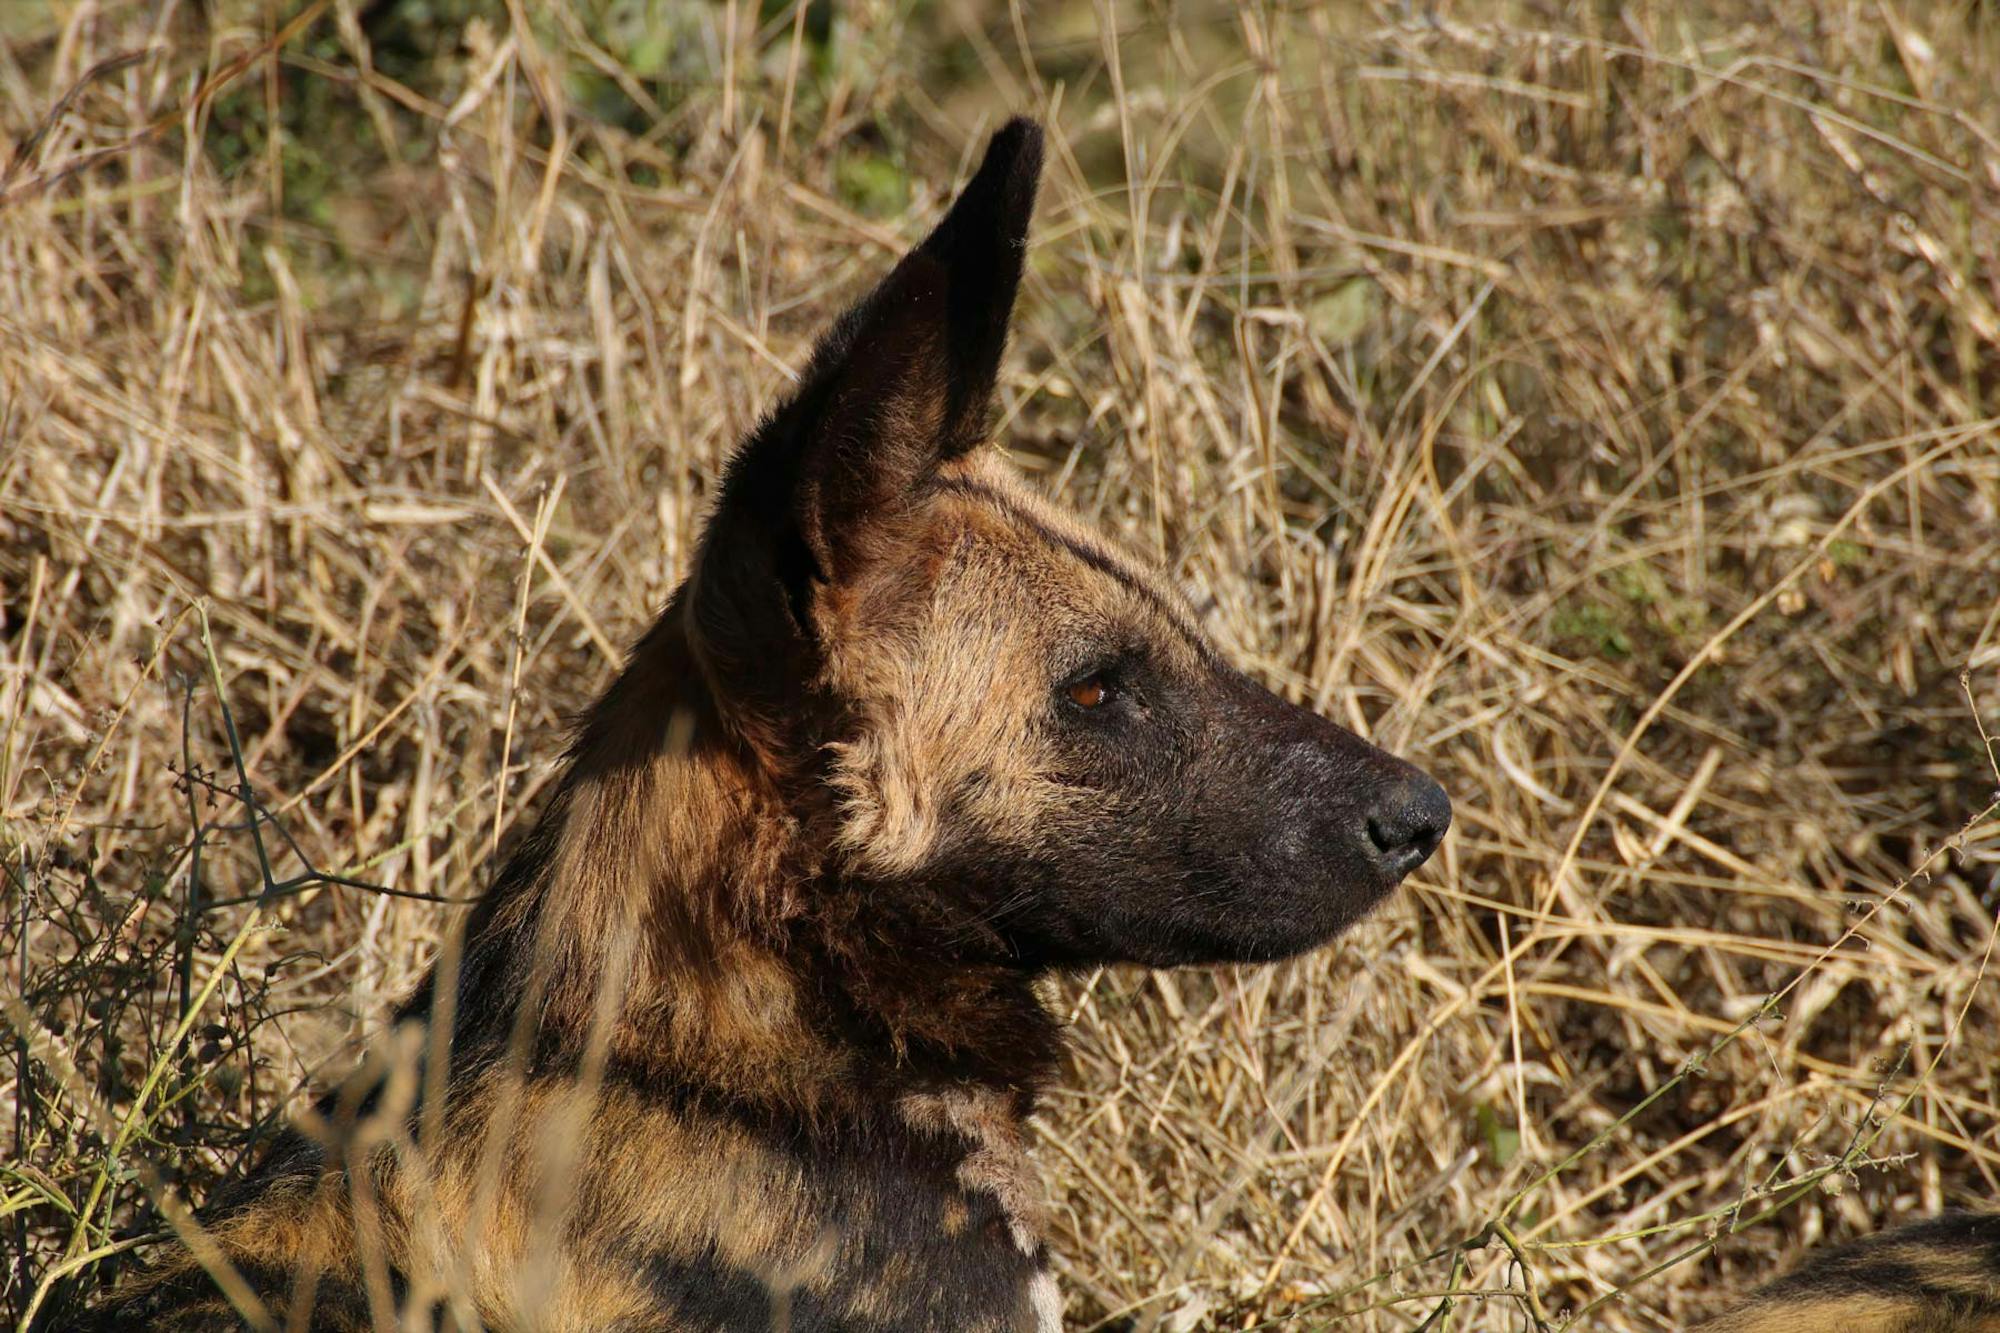 Wild dogs are the most endangered carnivore species in southern Africa.